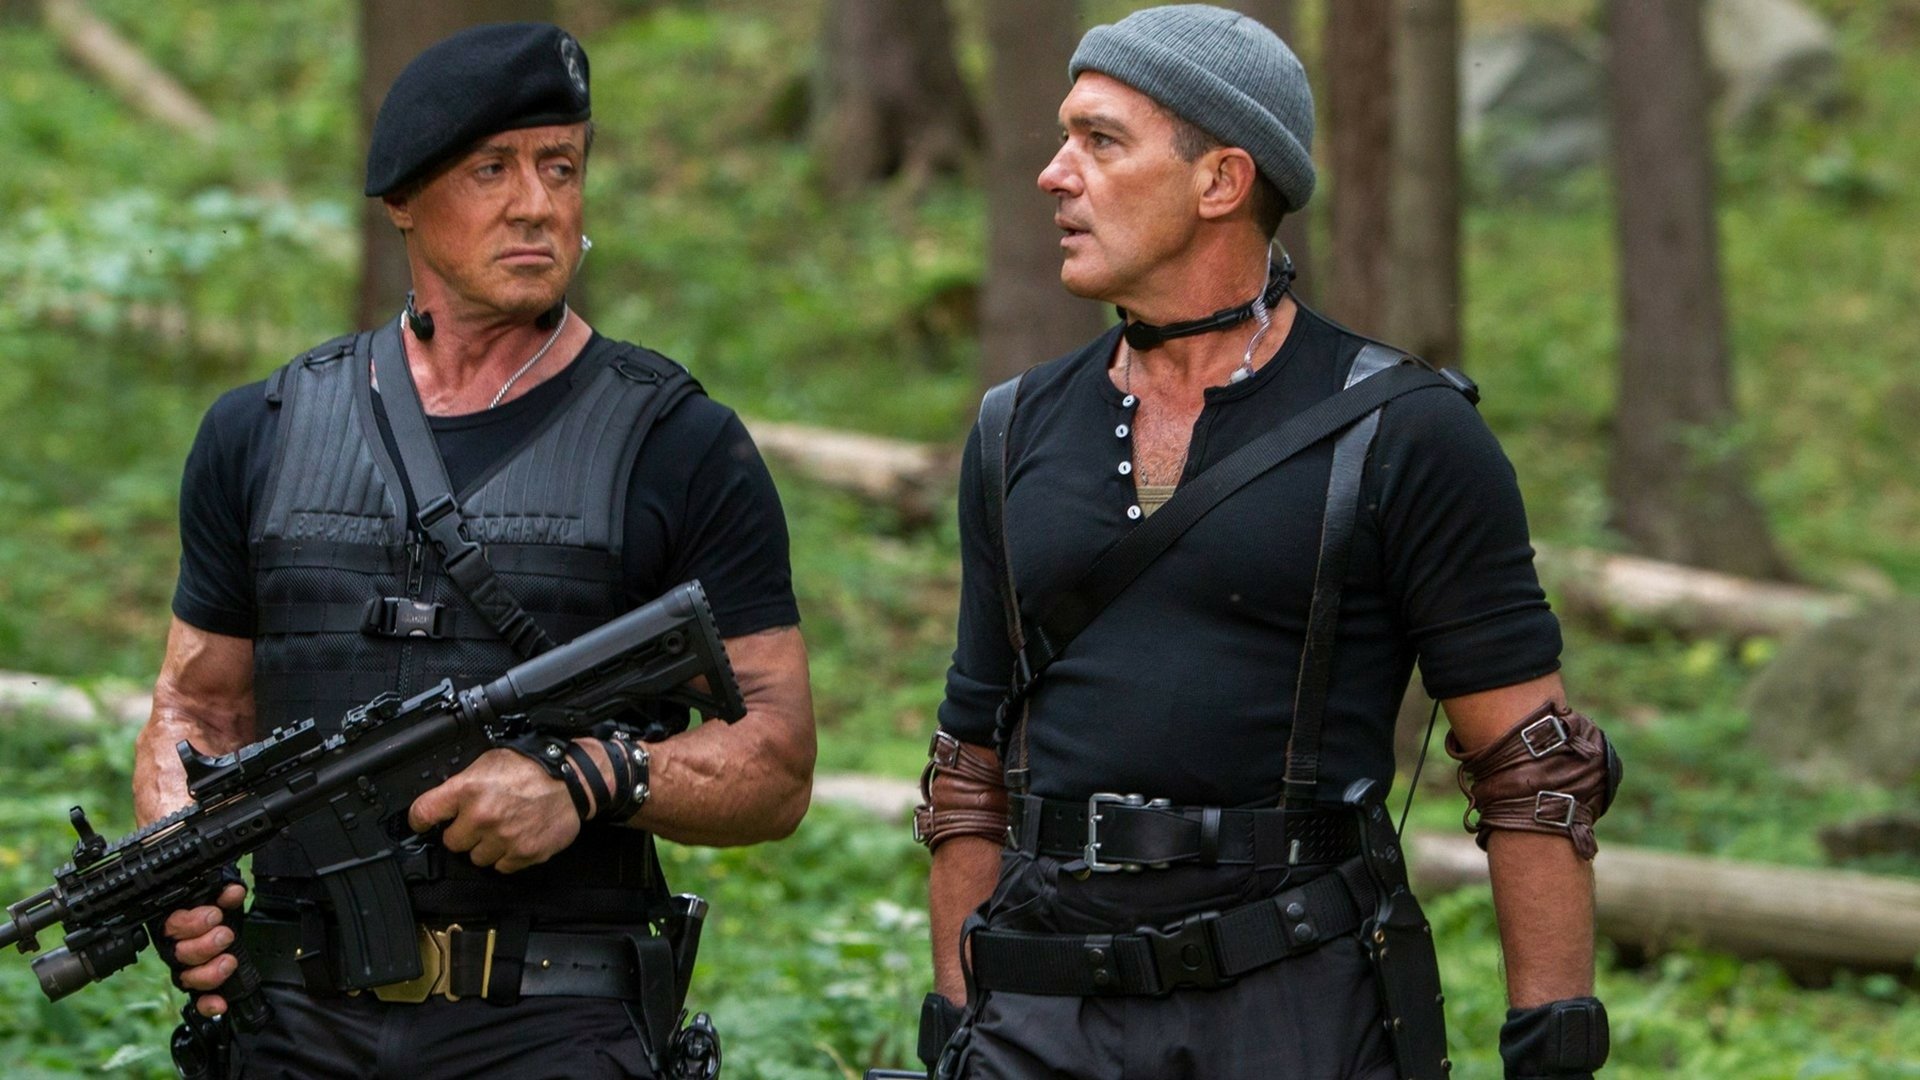 expendables movie torrent